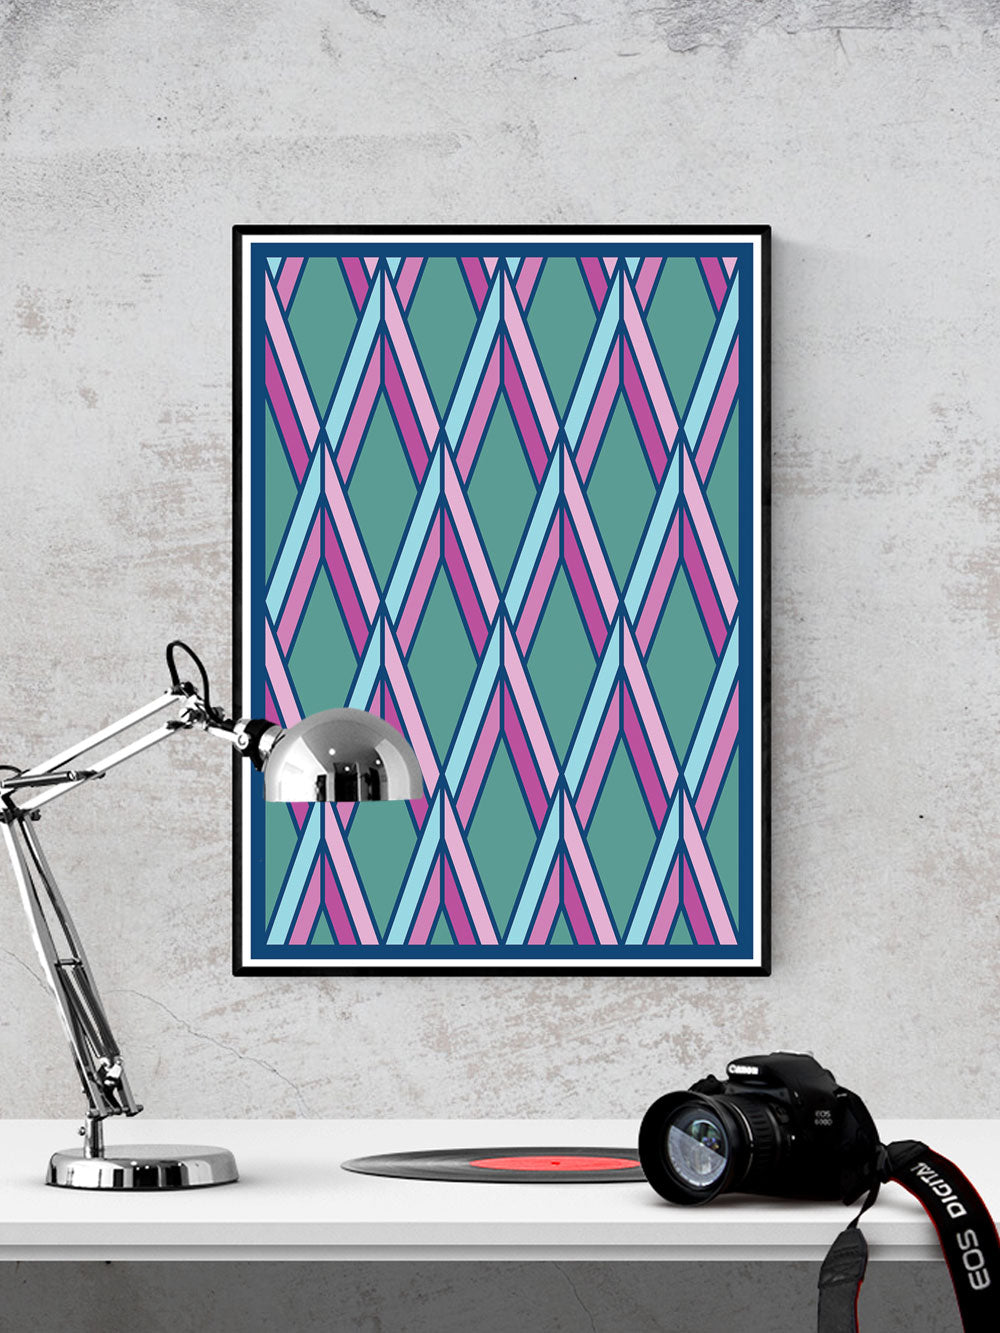 The Candy Stained Glass Graphic Print in a frame on a wall